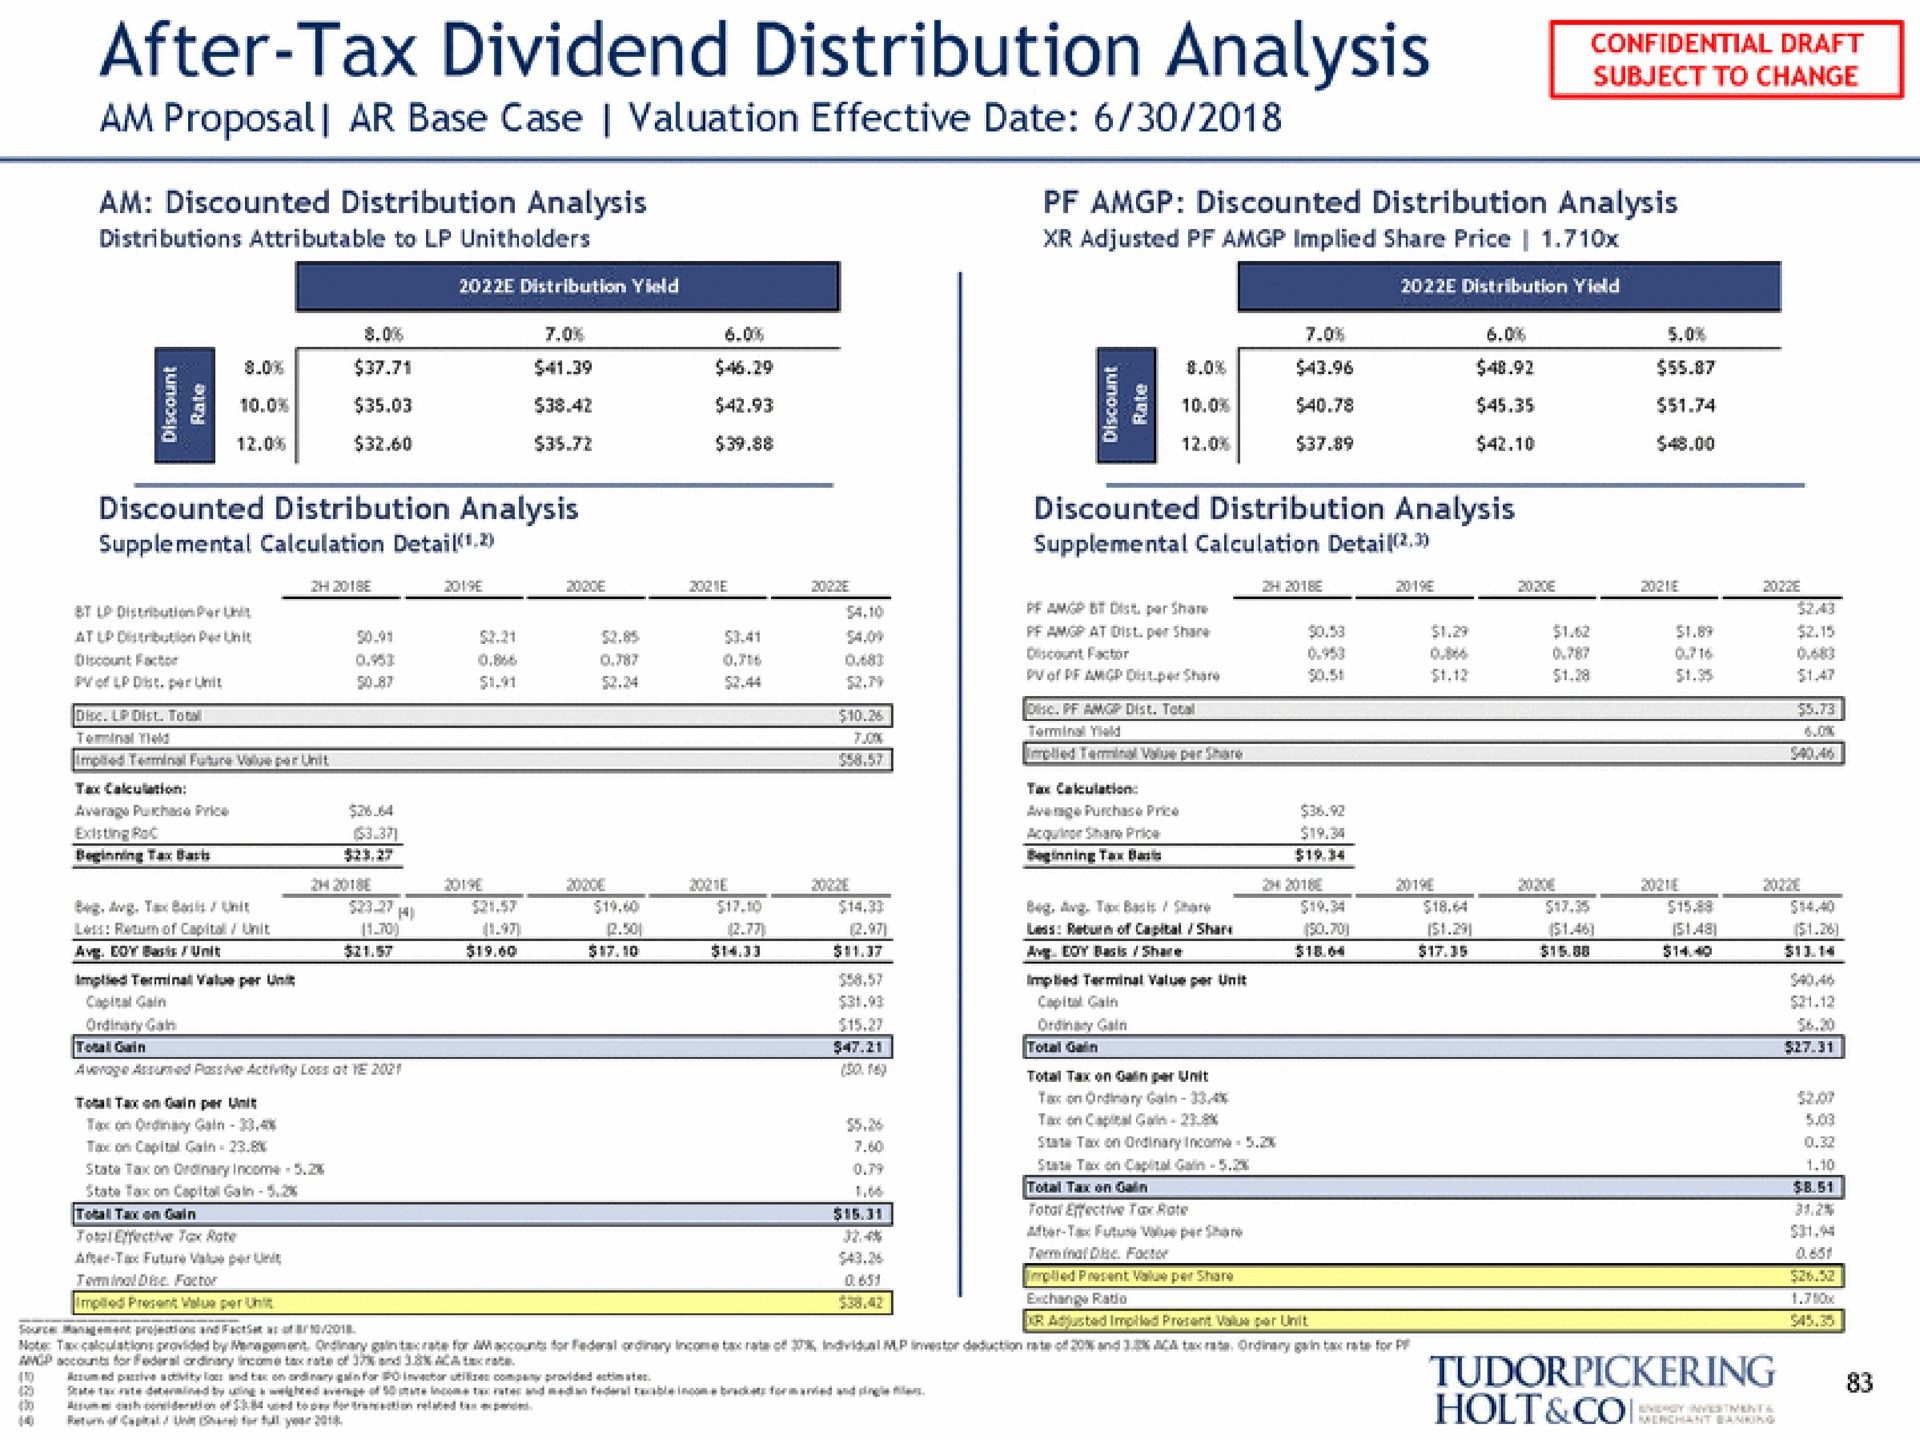 after tax dividend distribution analysis a | Tudor, Pickering, Holt & Co